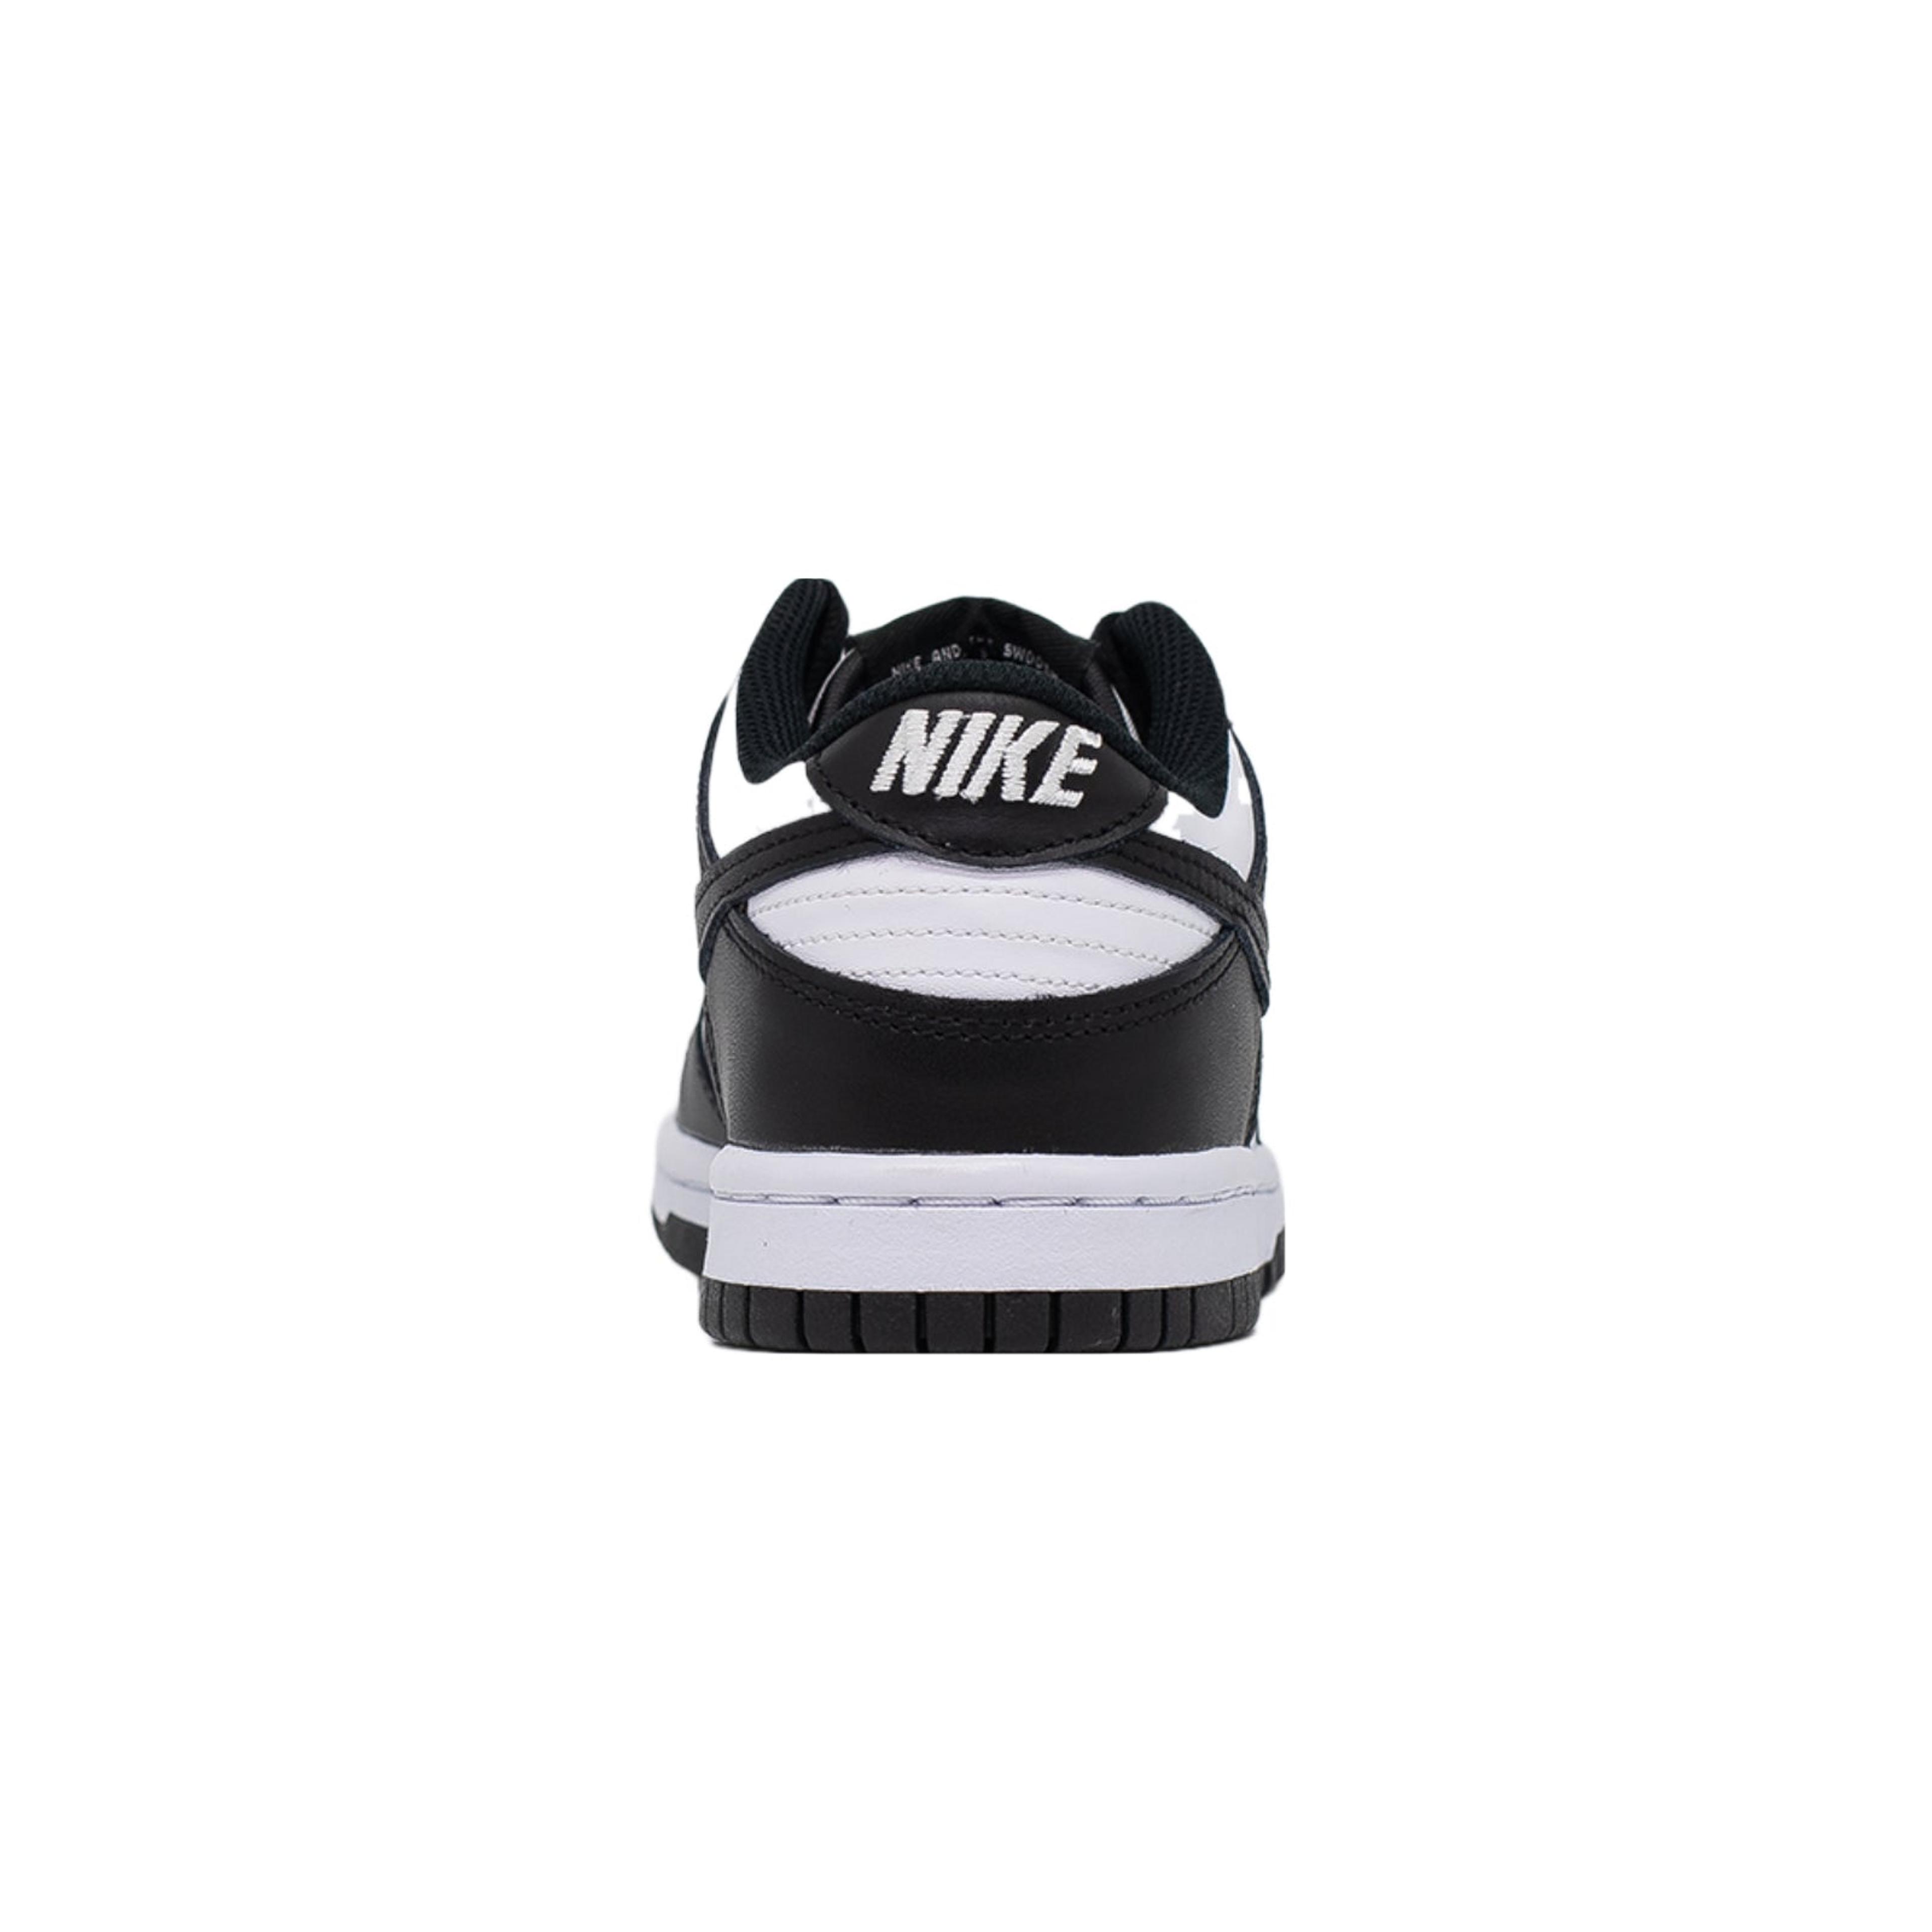 Alternate View 3 of Nike Dunk Low (PS), Black White